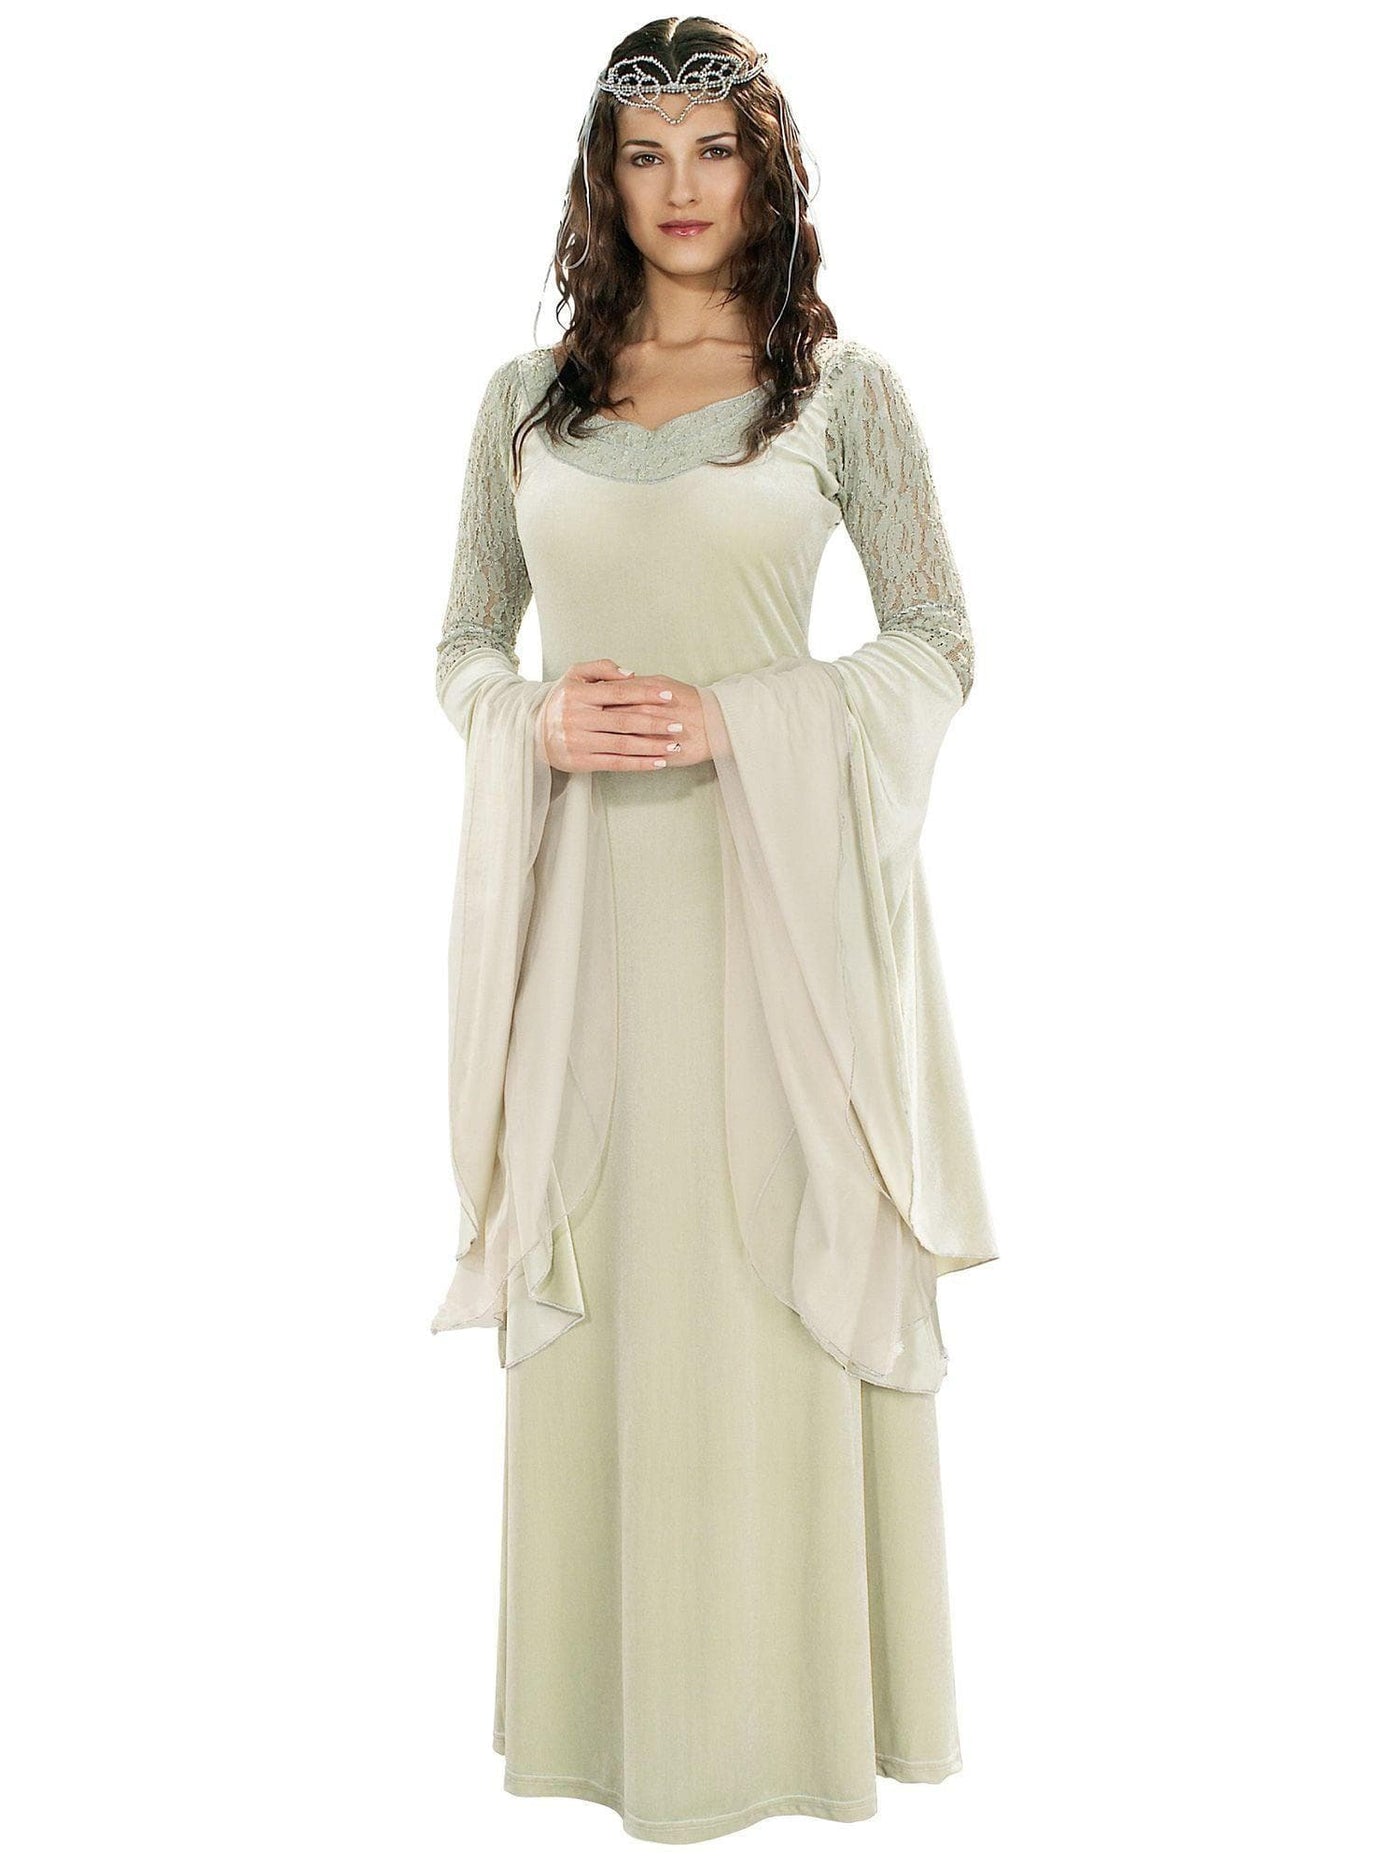 The Lord of the Rings Women's Deluxe Queen Arwen Costume